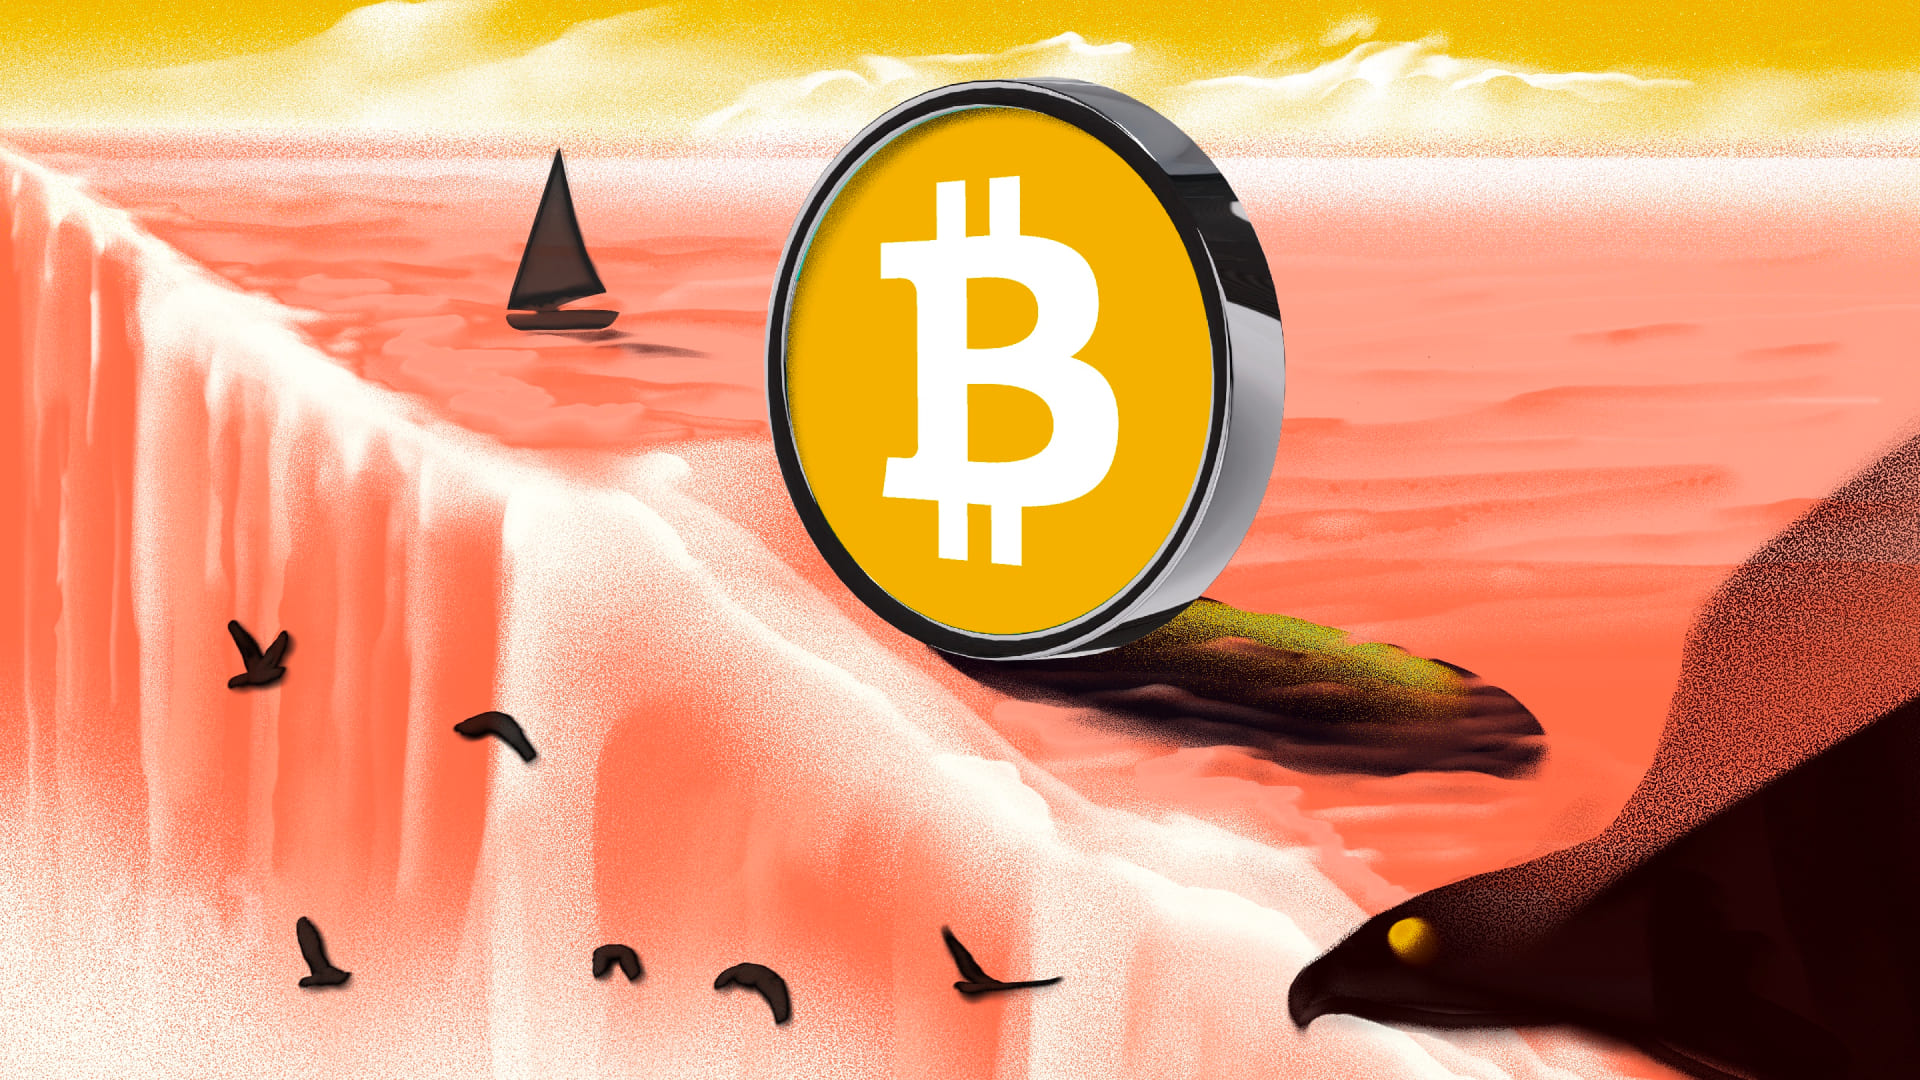 Bitcoin (BTC) Sees Resurgence in On-Chain Activity Amid Price Decline